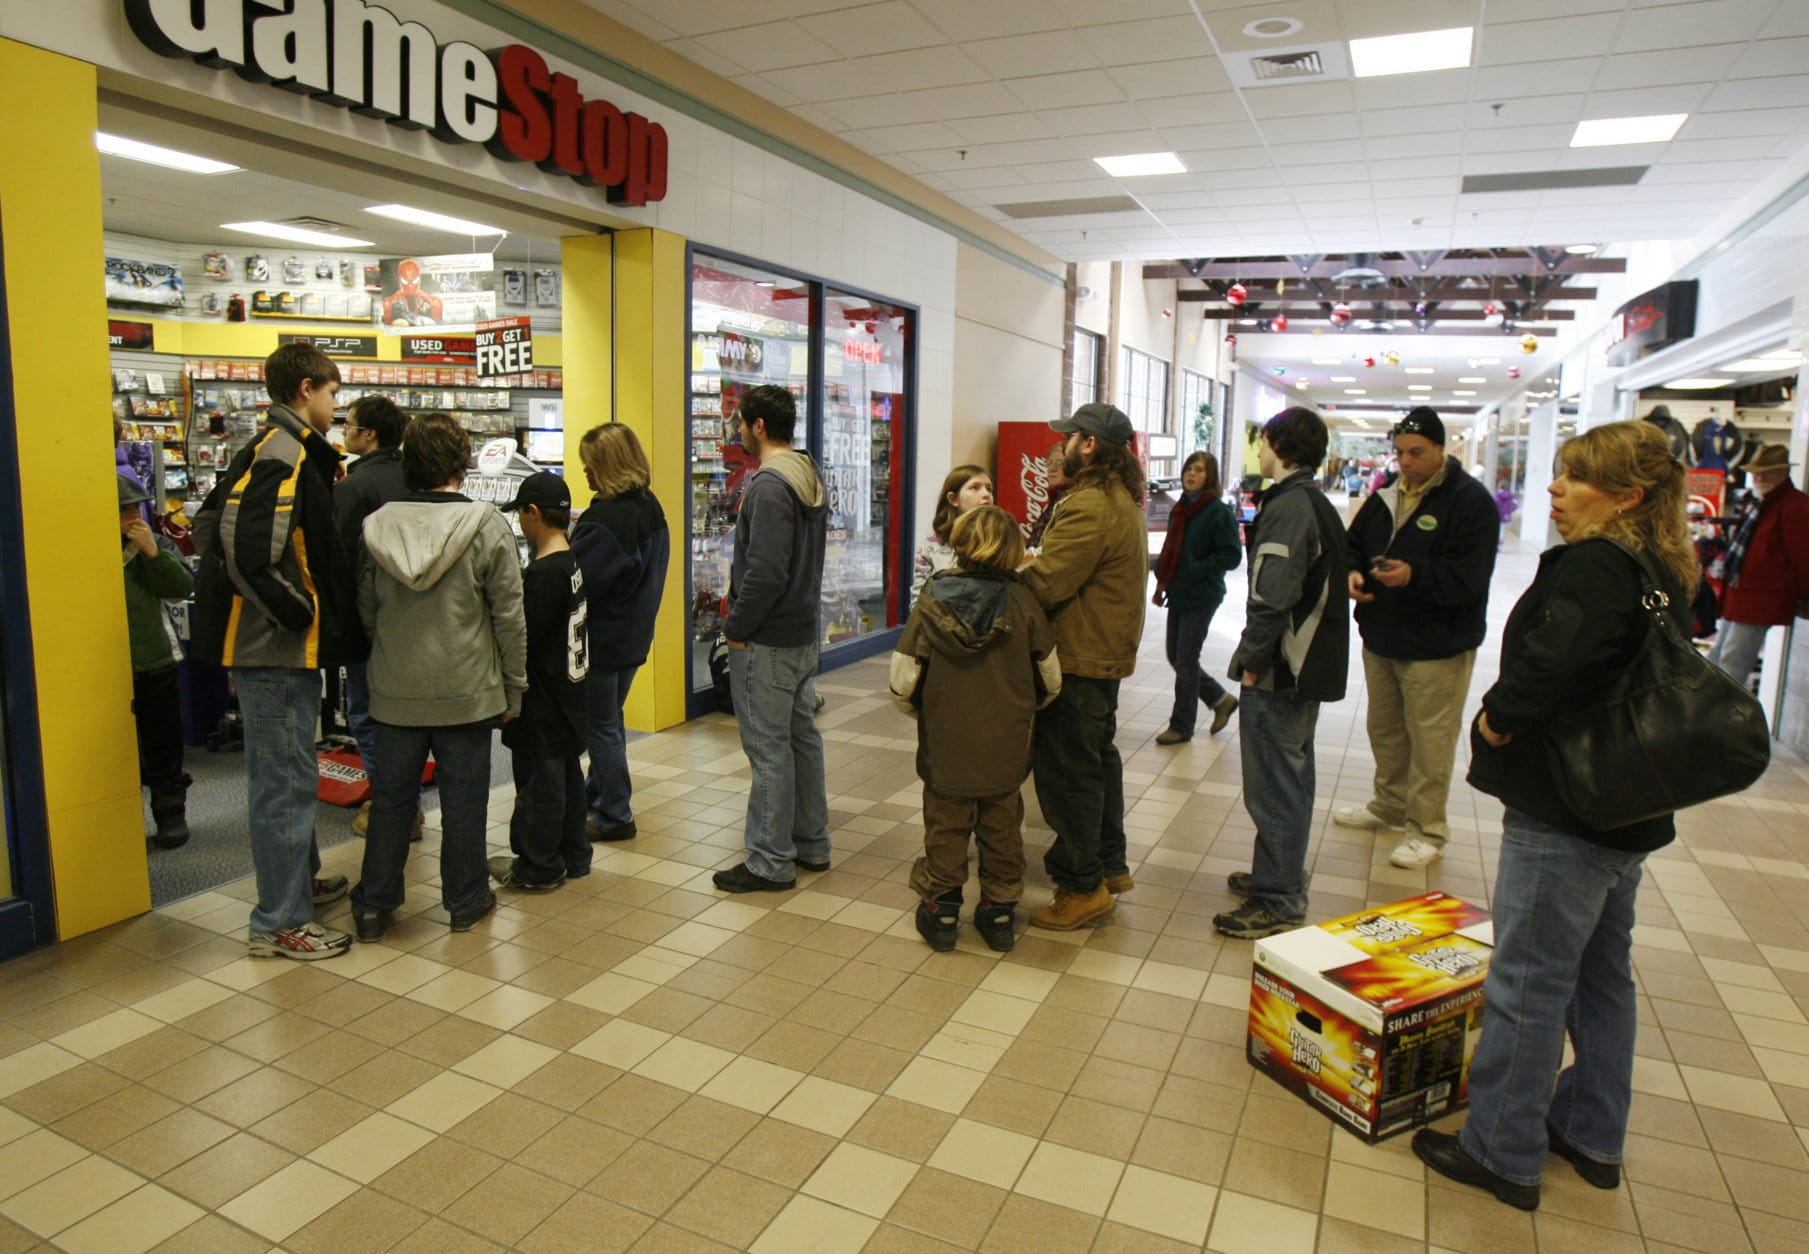 A line of shoppers extends out of the store into the mall hallway at the Game Stop store in Berlin, Vt., Friday, Dec. 26, 2008. Shoppers hit the stores early Friday to return unwanted gifts and take advantage of drastic price cuts offered by retailers desperate to get rid of old merchandise and boost their less-than-cheery holiday sales.(AP Photo/Toby Talbot)